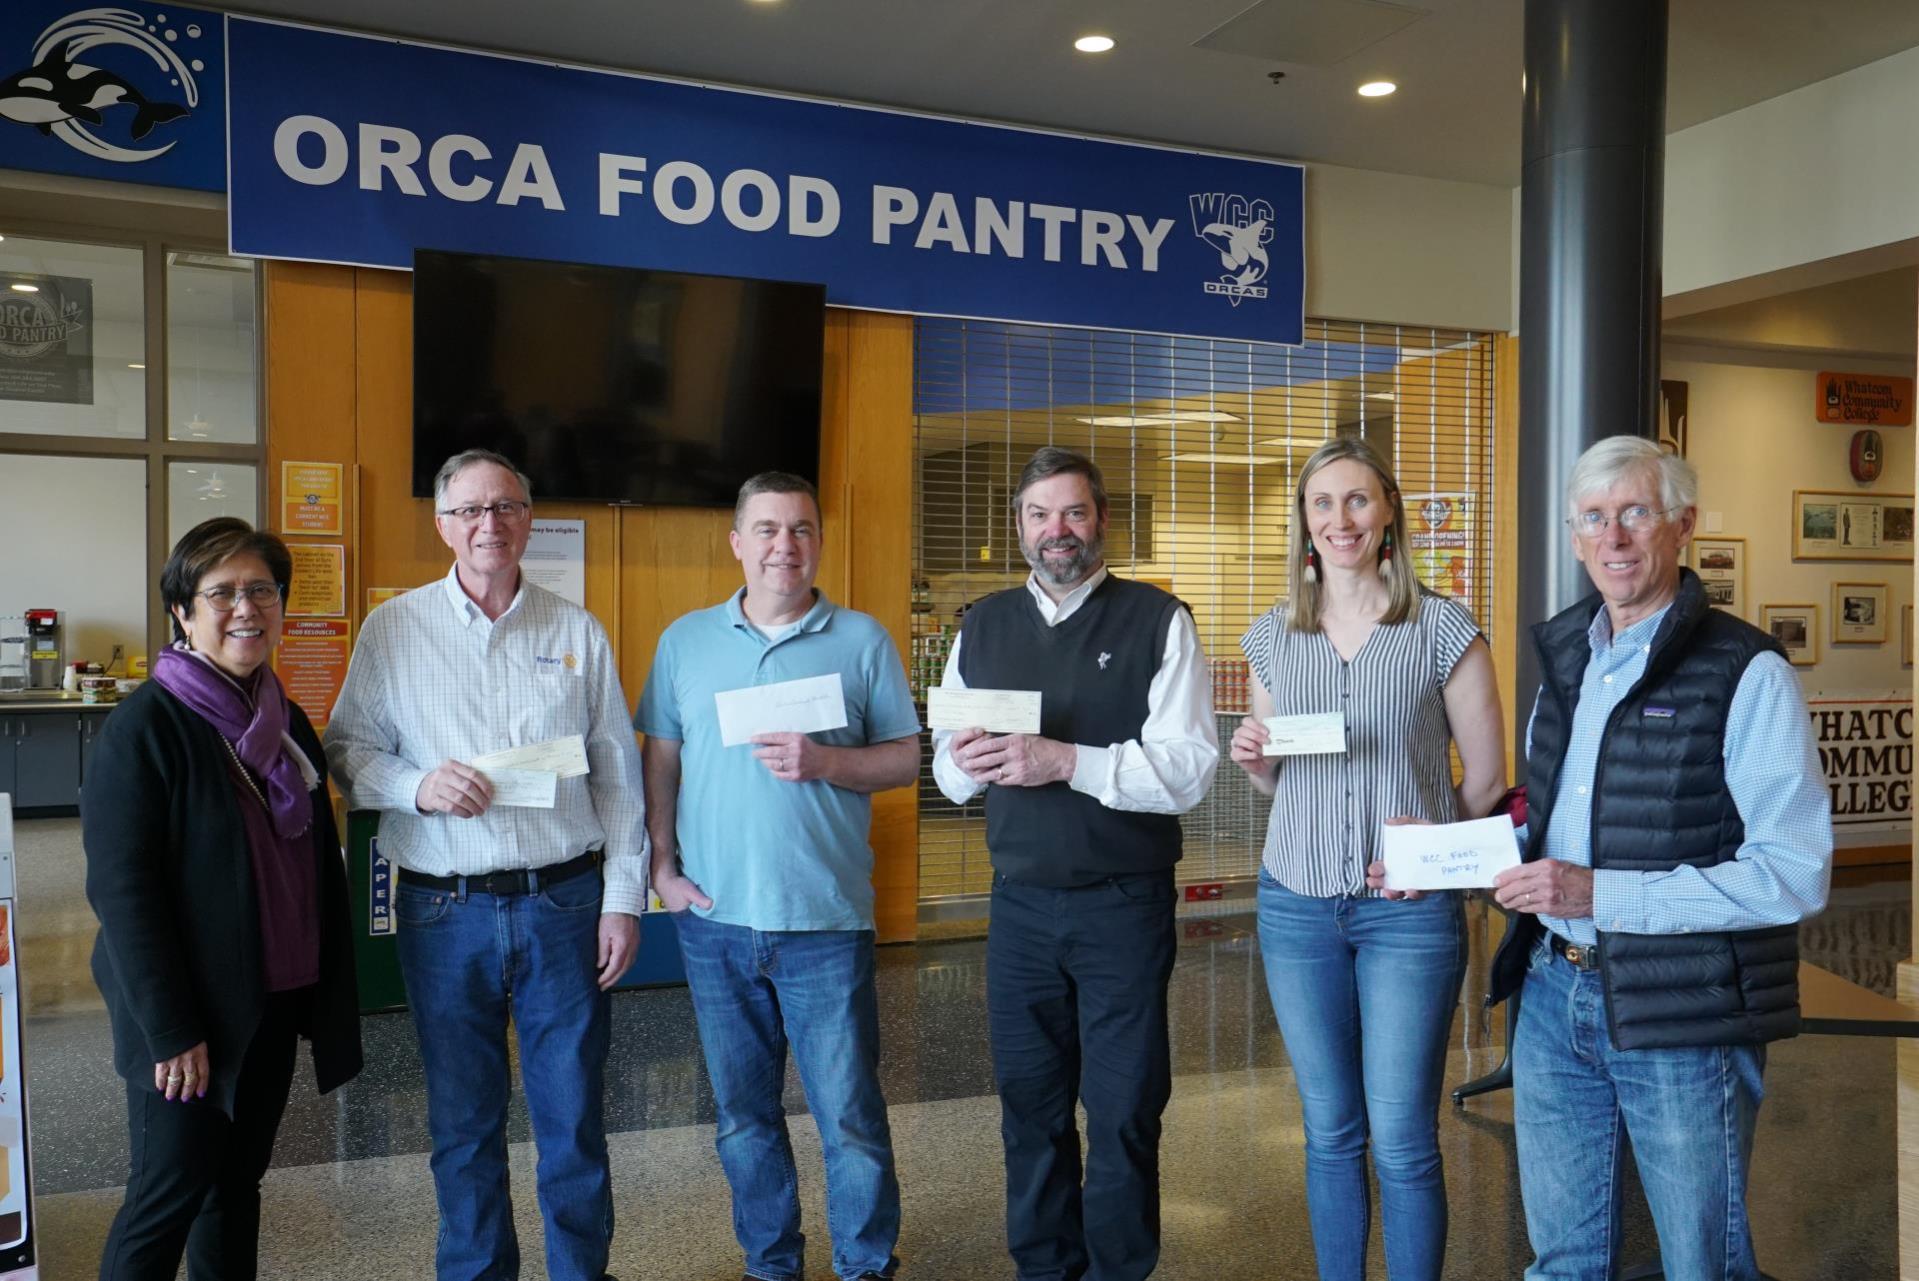 Local Rotary Clubs Collect Food & Cash Donations for Orca Food Pantry